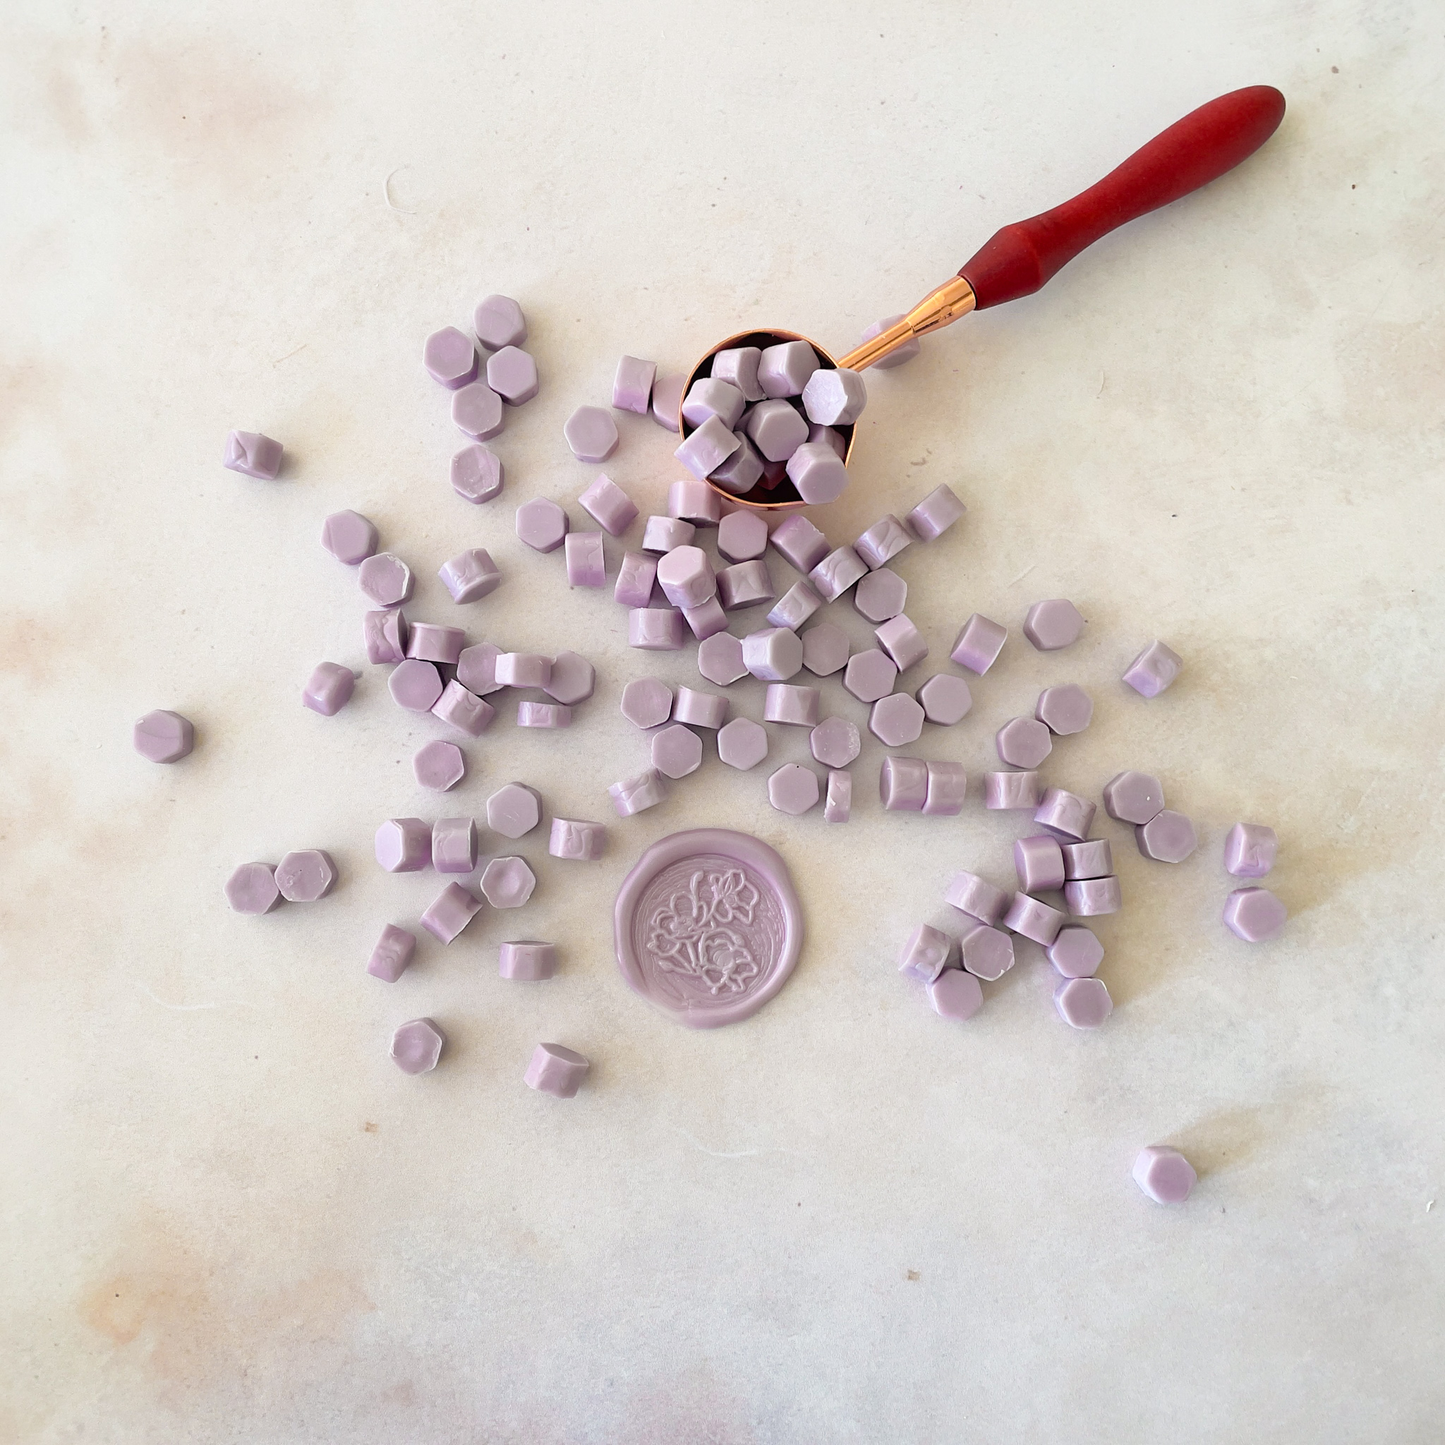 sealing wax beads in soft lilac colour.  Make decorative wax stamps and seals with pastel lilac wax